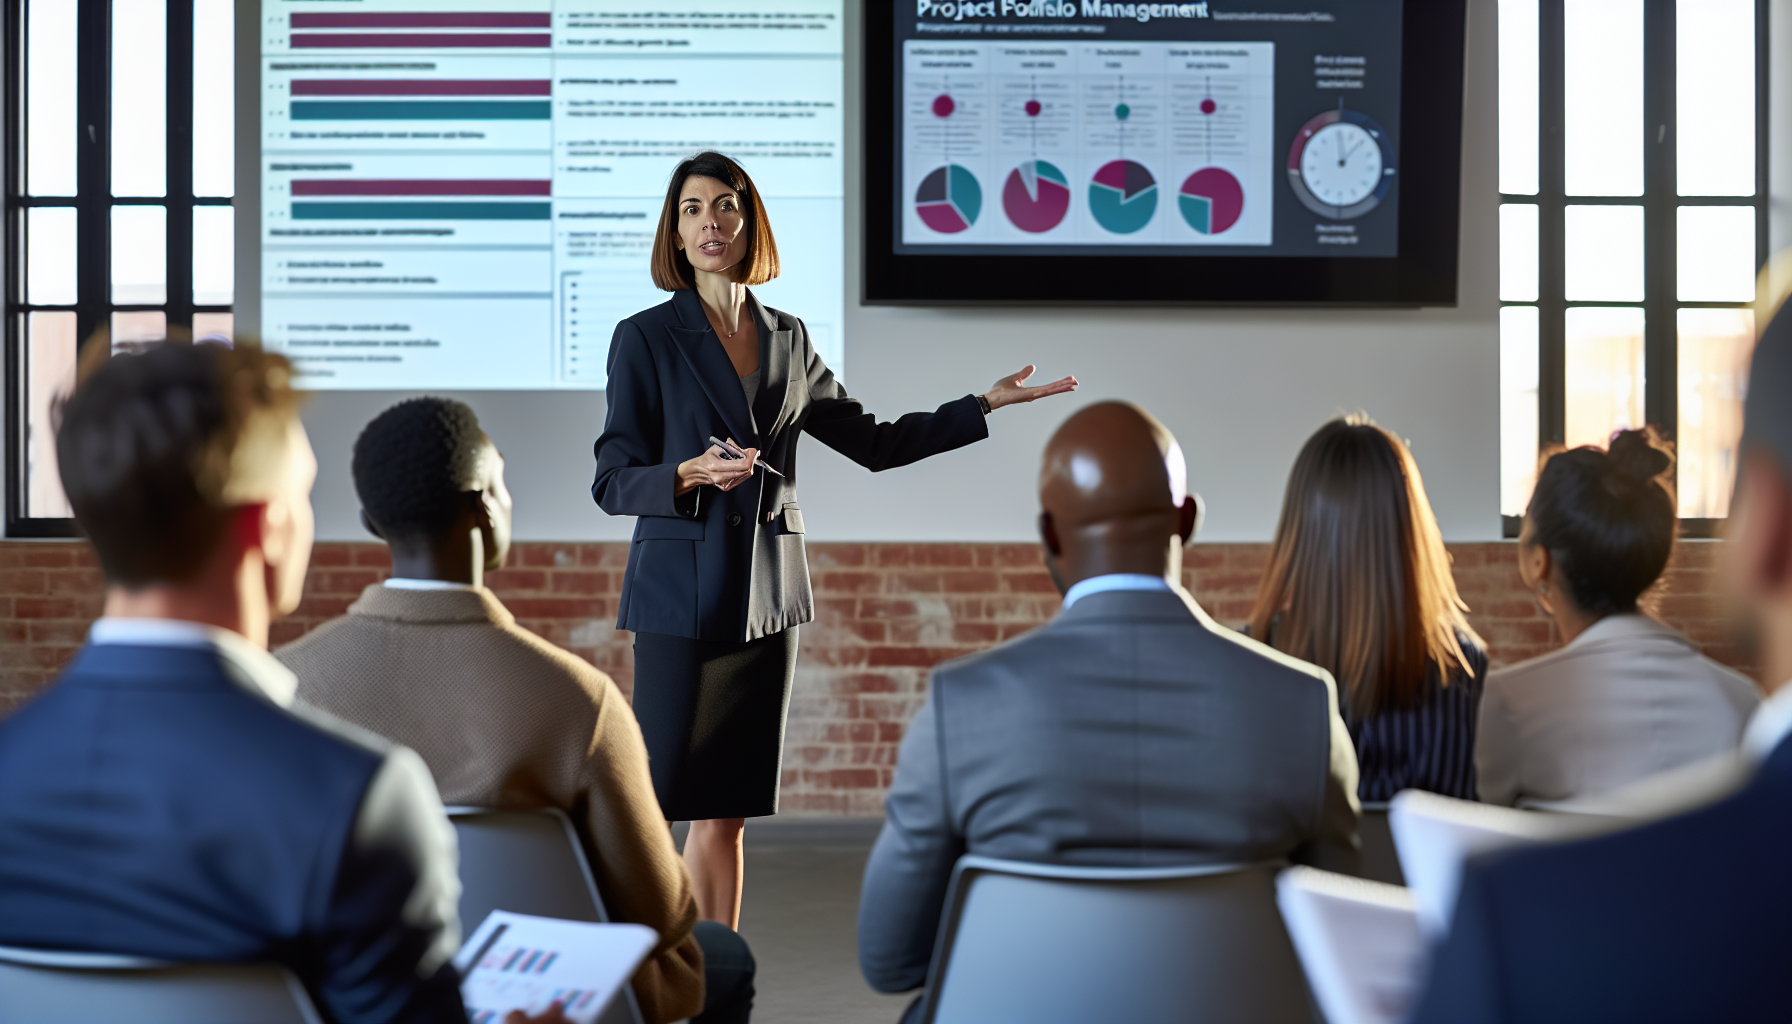 Communication and presentation skills are vital for project portfolio managers